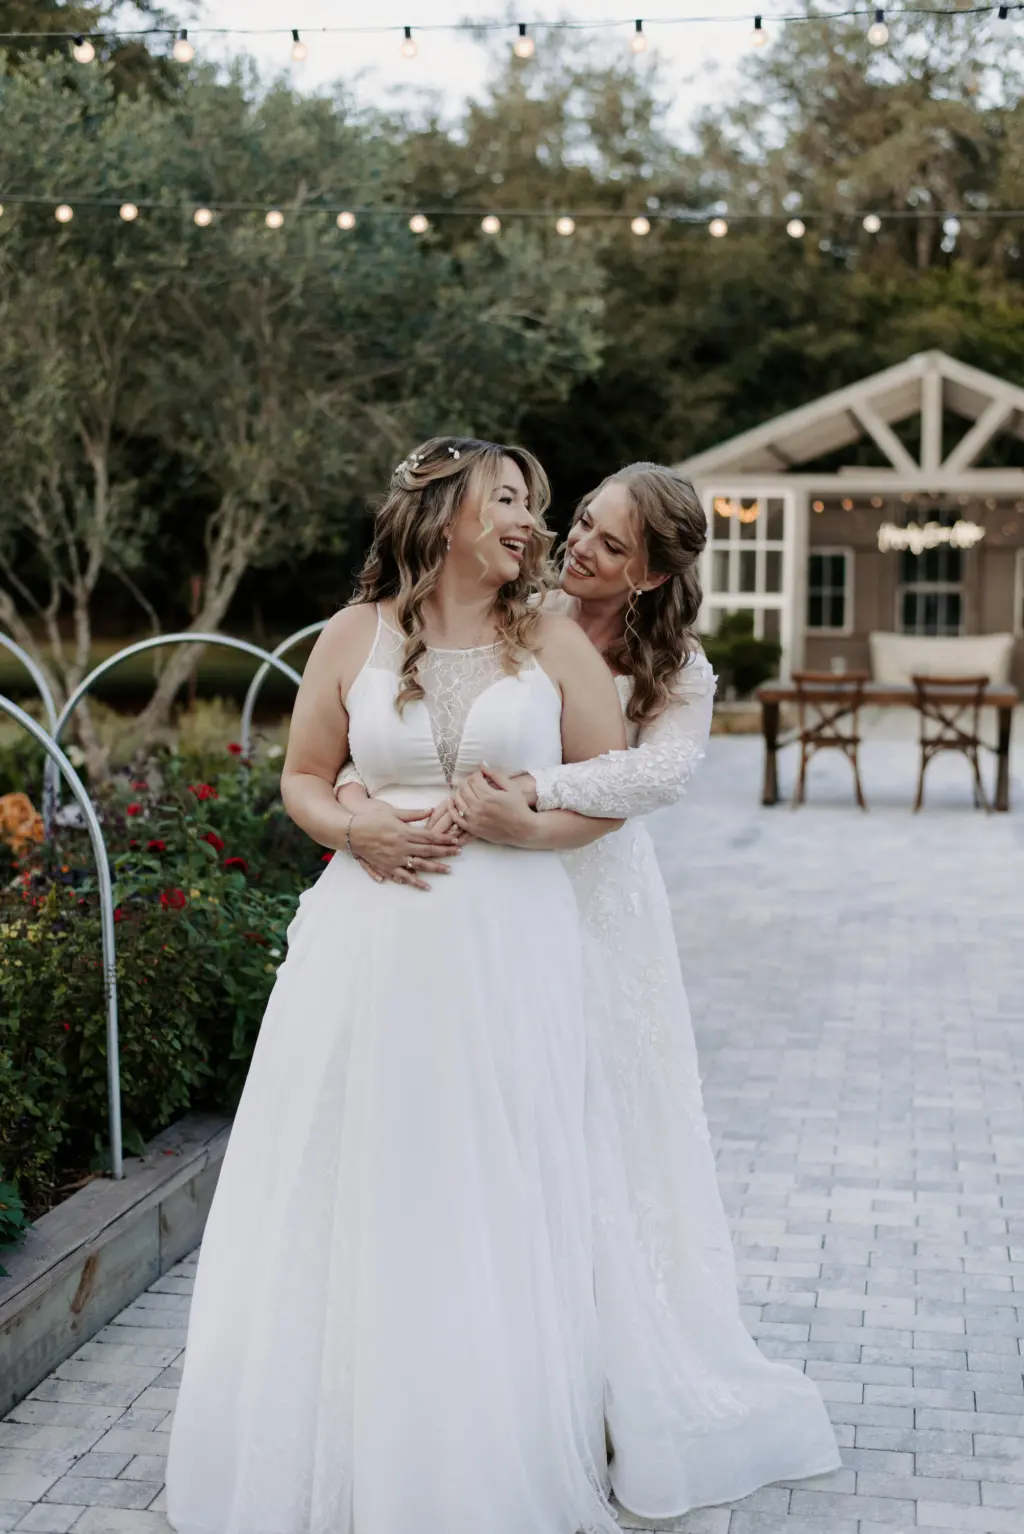 Same Sex Couple First Look Bridal Portraits at Garden Wedding Venue | Seffner Venue Mill Pond Estates | Planner Stephany Perry Events